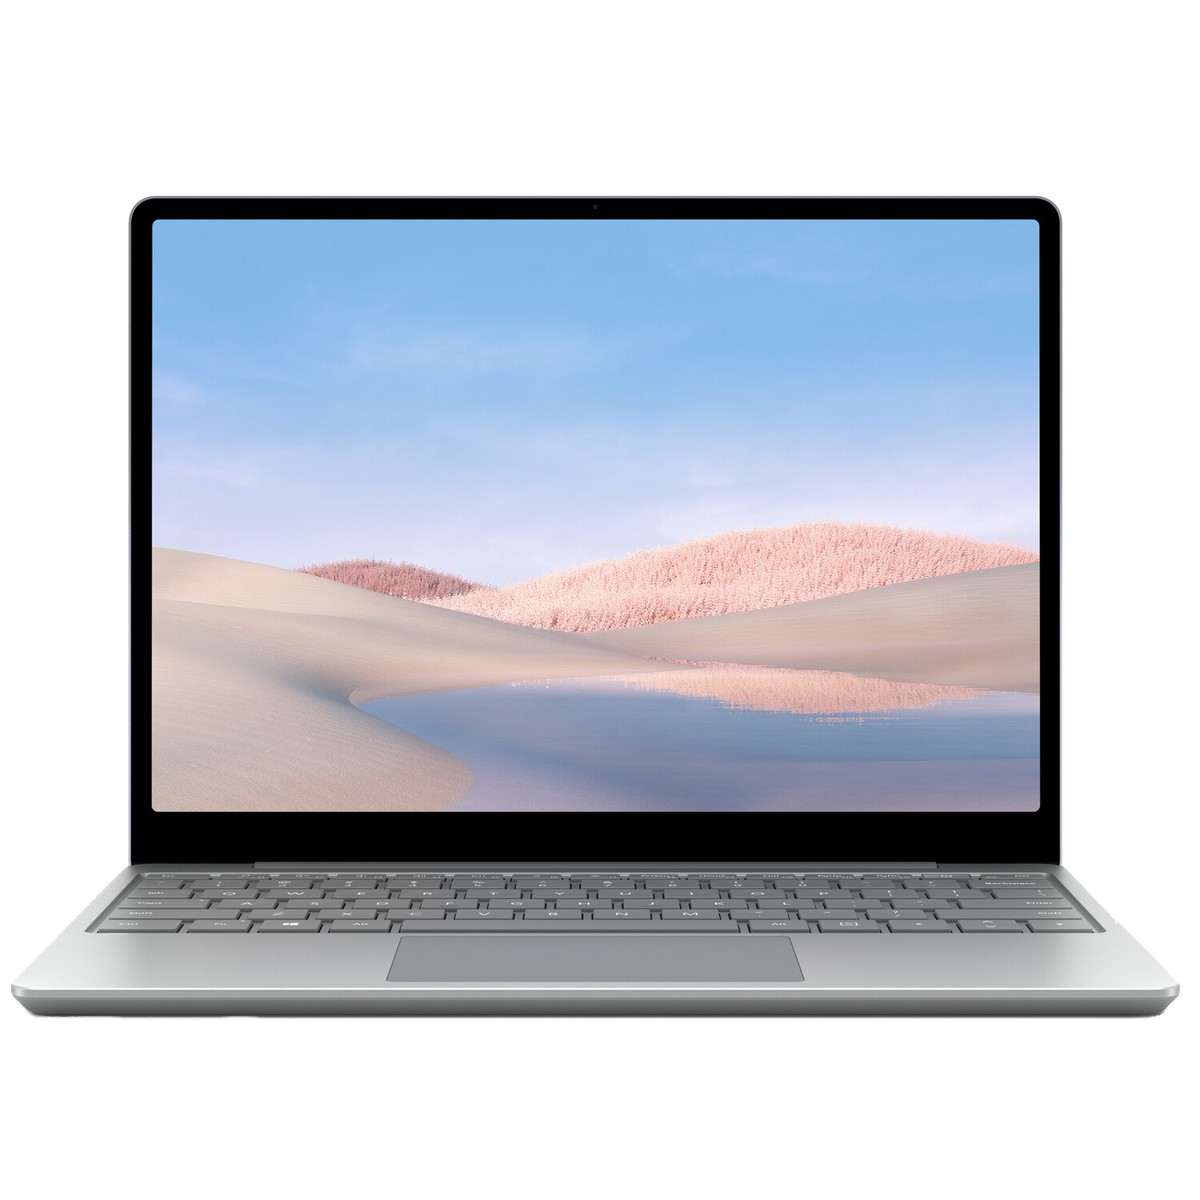 Microsoft Surface Laptop Go 12.4" 2020 Core i5 8/128 GB SSD W10H ‎THH-00009 QWERTY silber - Ohne Vertrag